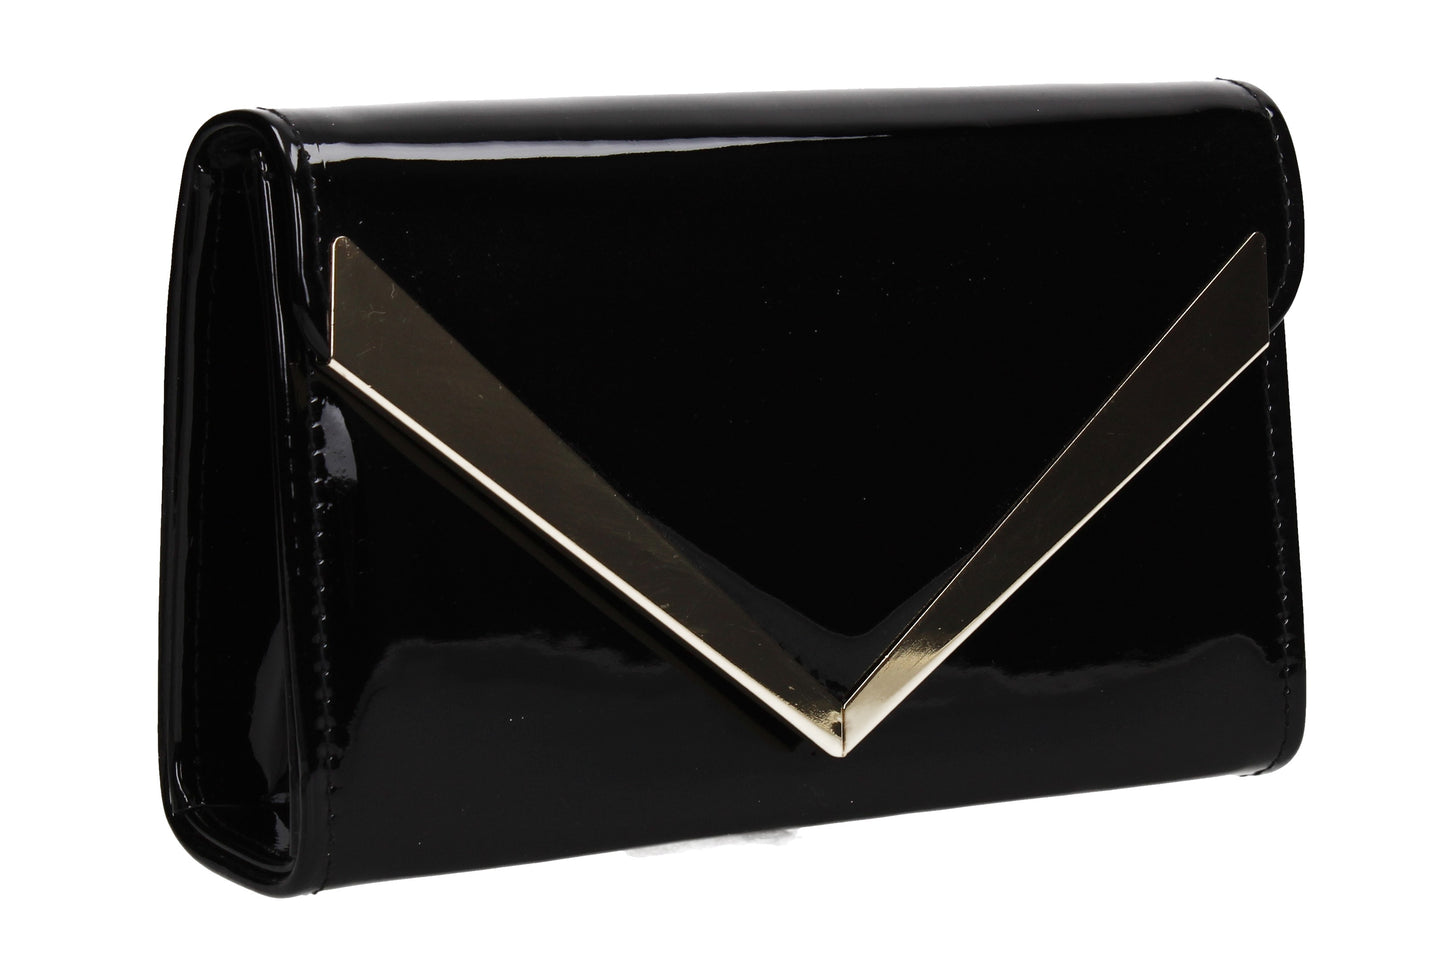 SWANKYSWANS Wendy V Patent Clutch Bag Black Cute Cheap Clutch Bag For Weddings School and Work